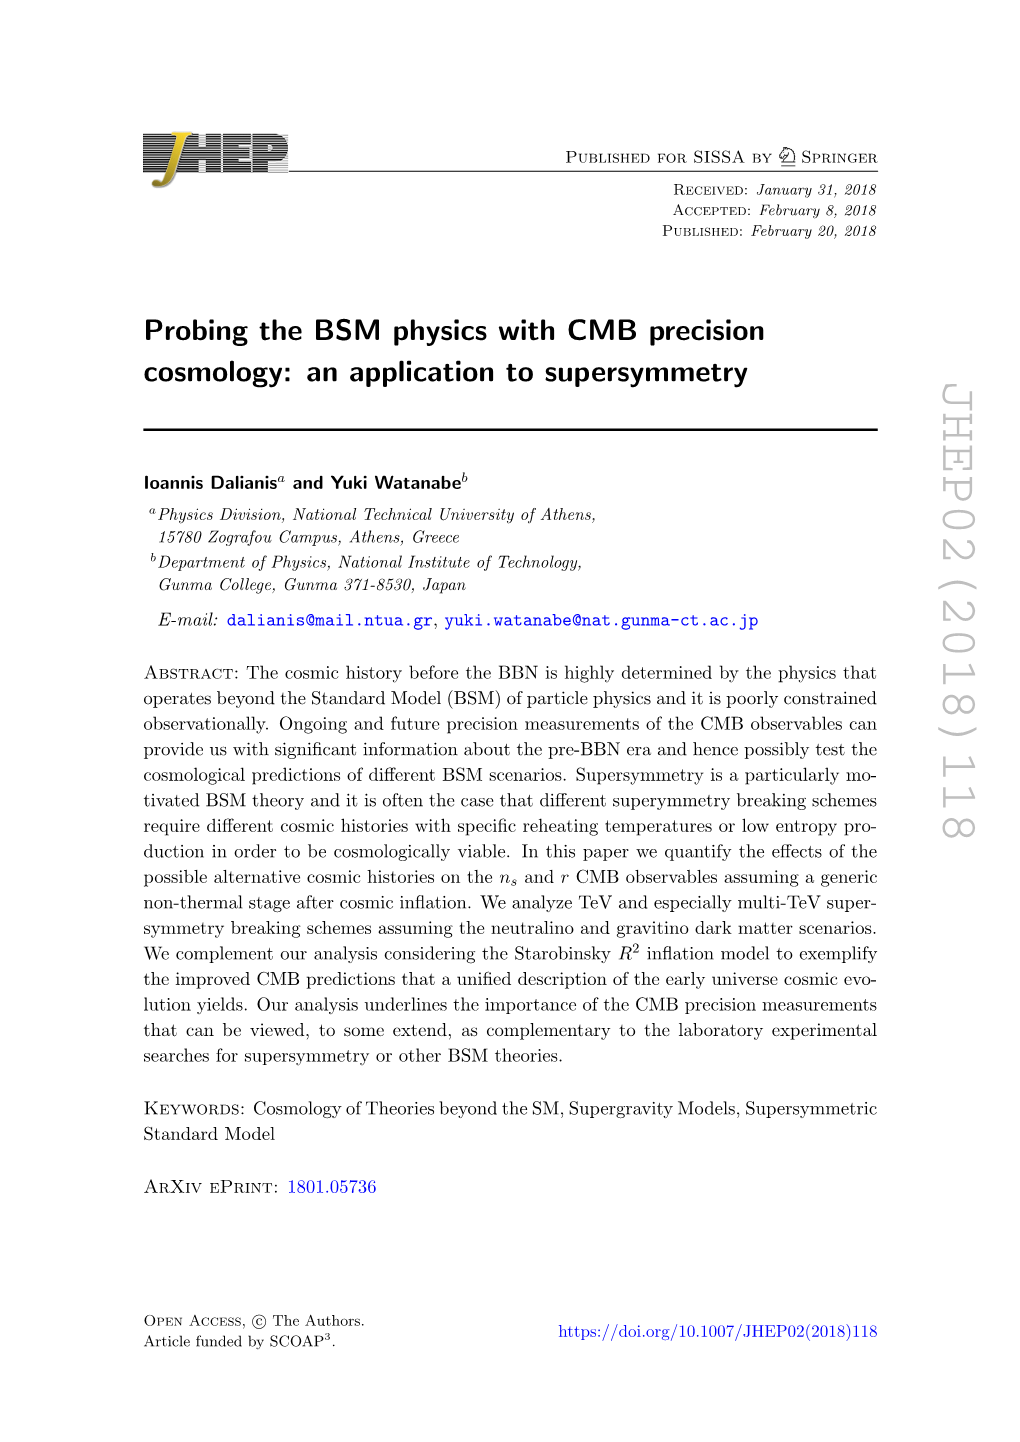 Probing the BSM Physics with CMB Precision Cosmology: an Application